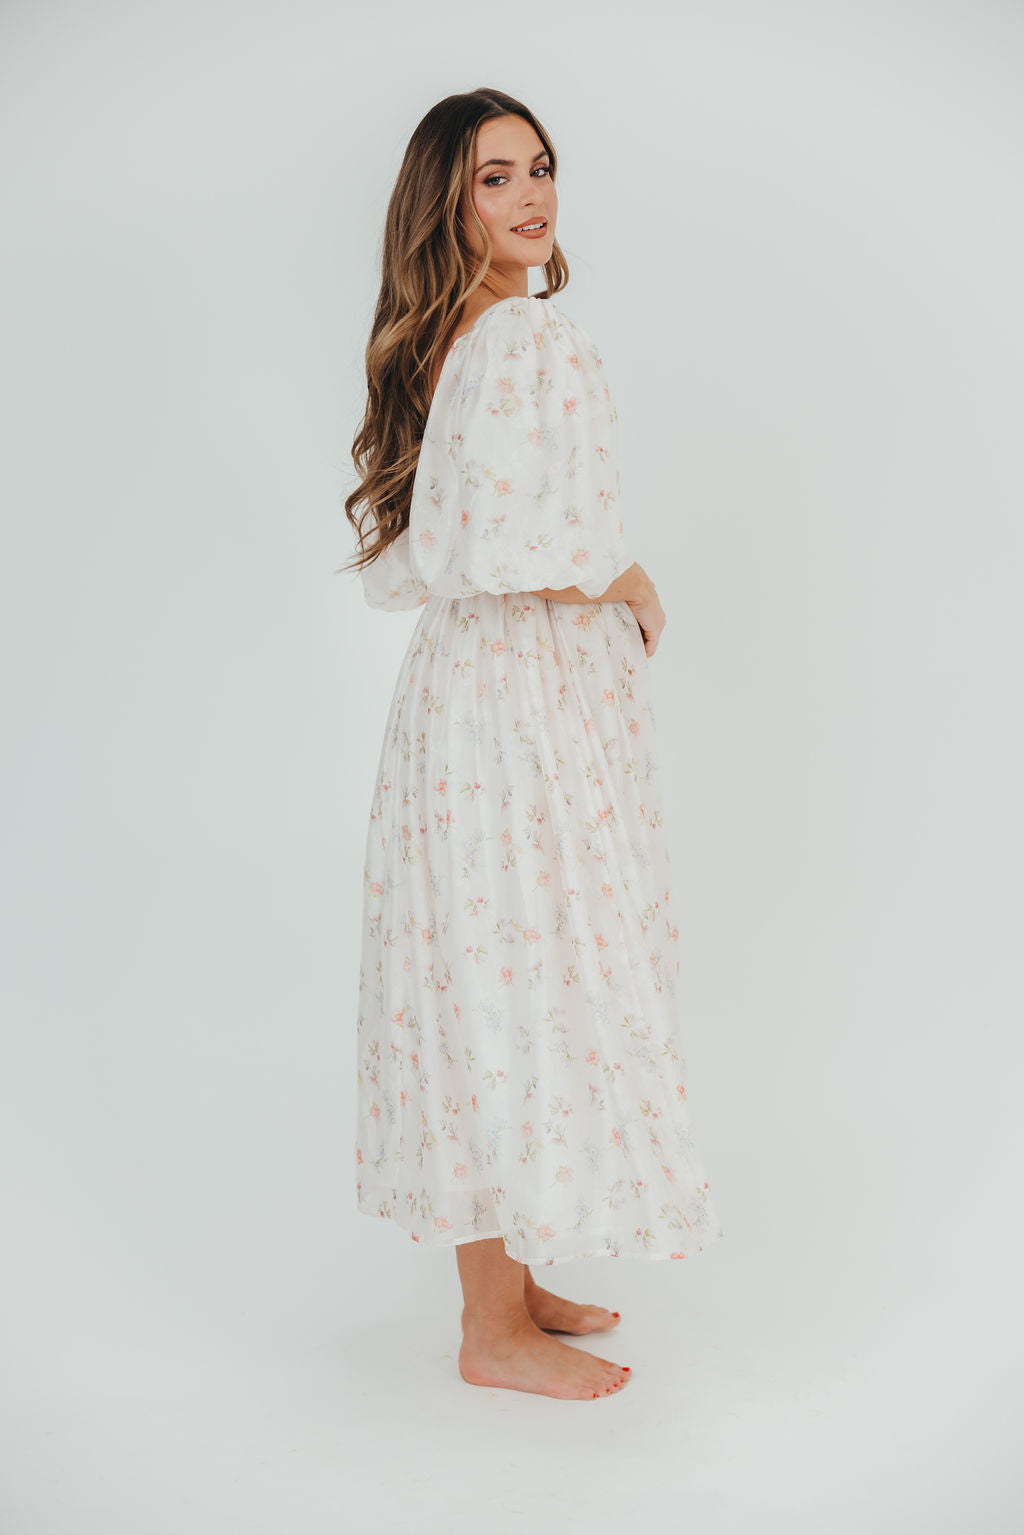 Harlow Maxi Dress in Tiny Pink Floral - Bump Friendly & Inclusive Sizing (S-3XL)